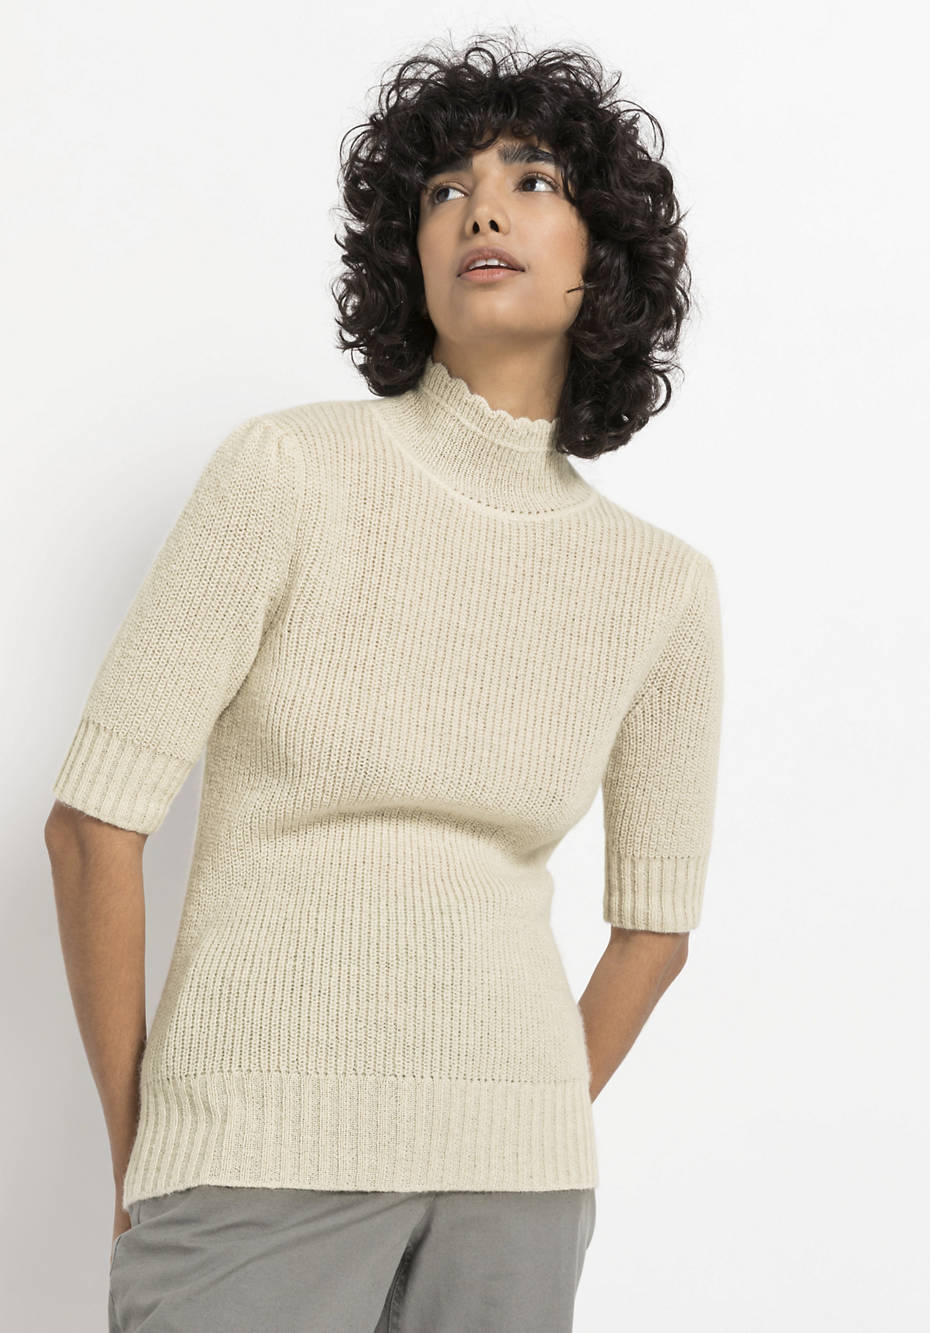 Half-sleeved sweater made from pure alpaca